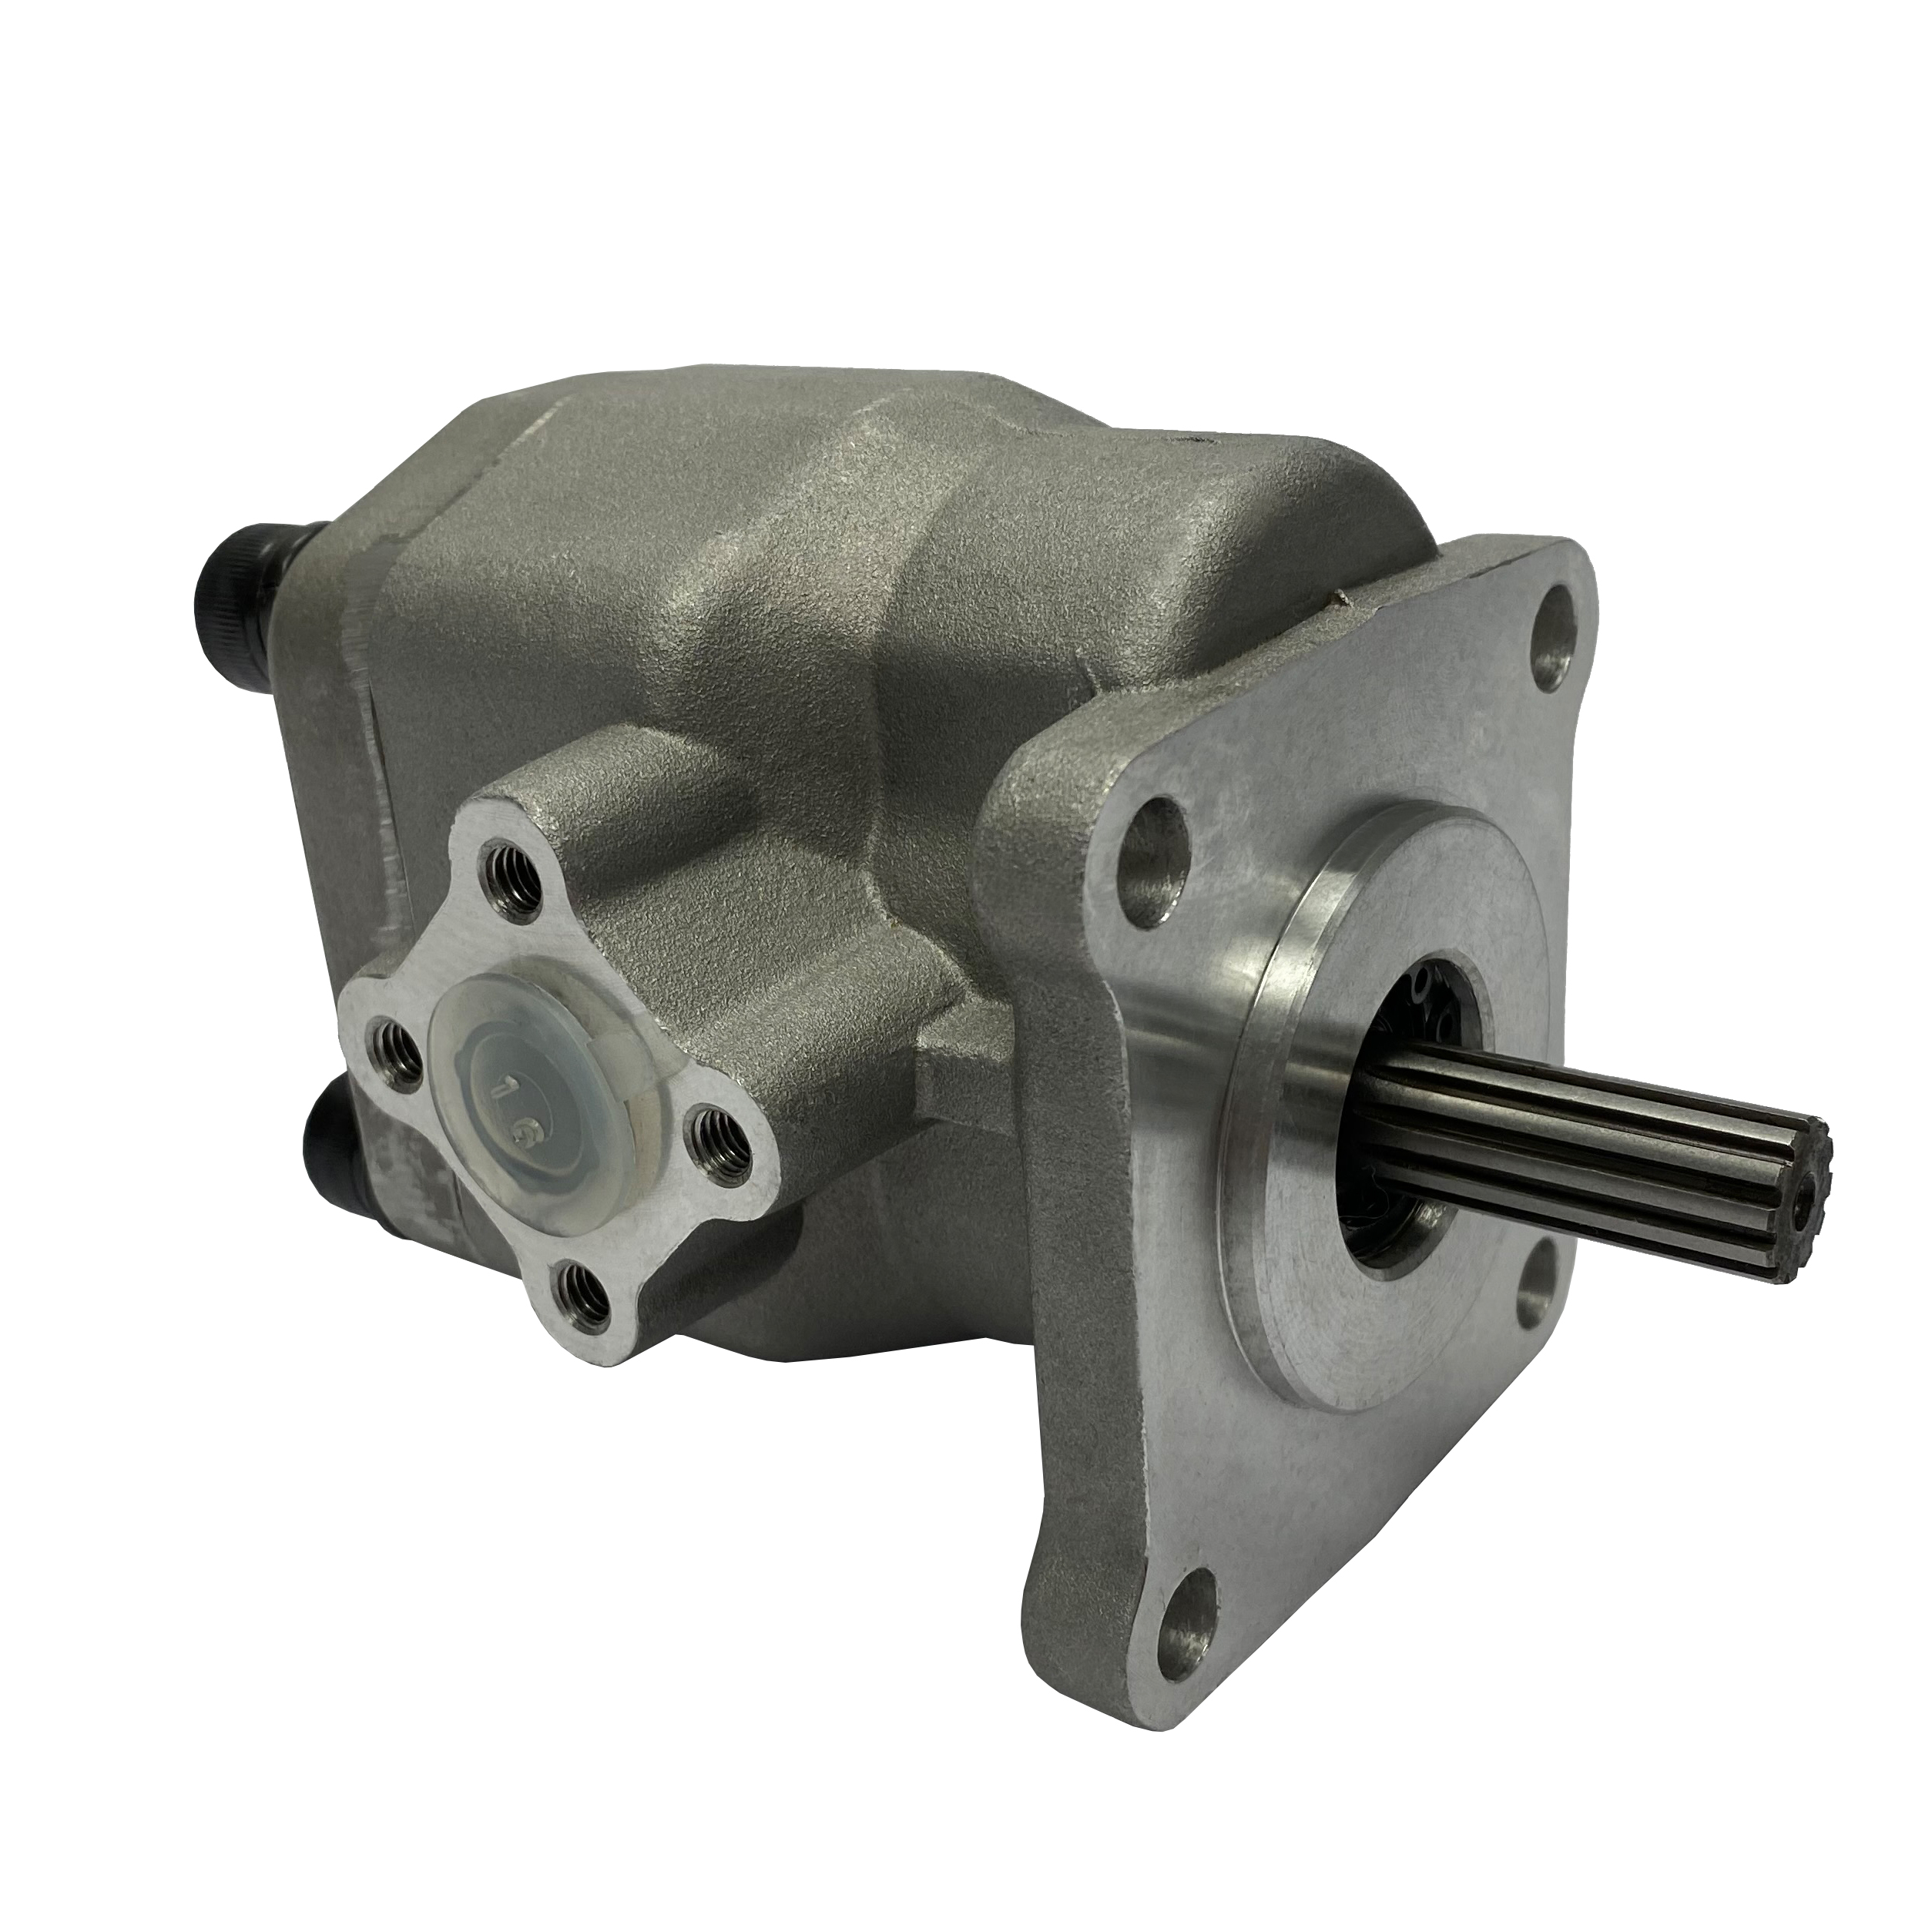 Hydraulic gear pump replacement for Kubota 38240-76100 | Magister Hydraulics